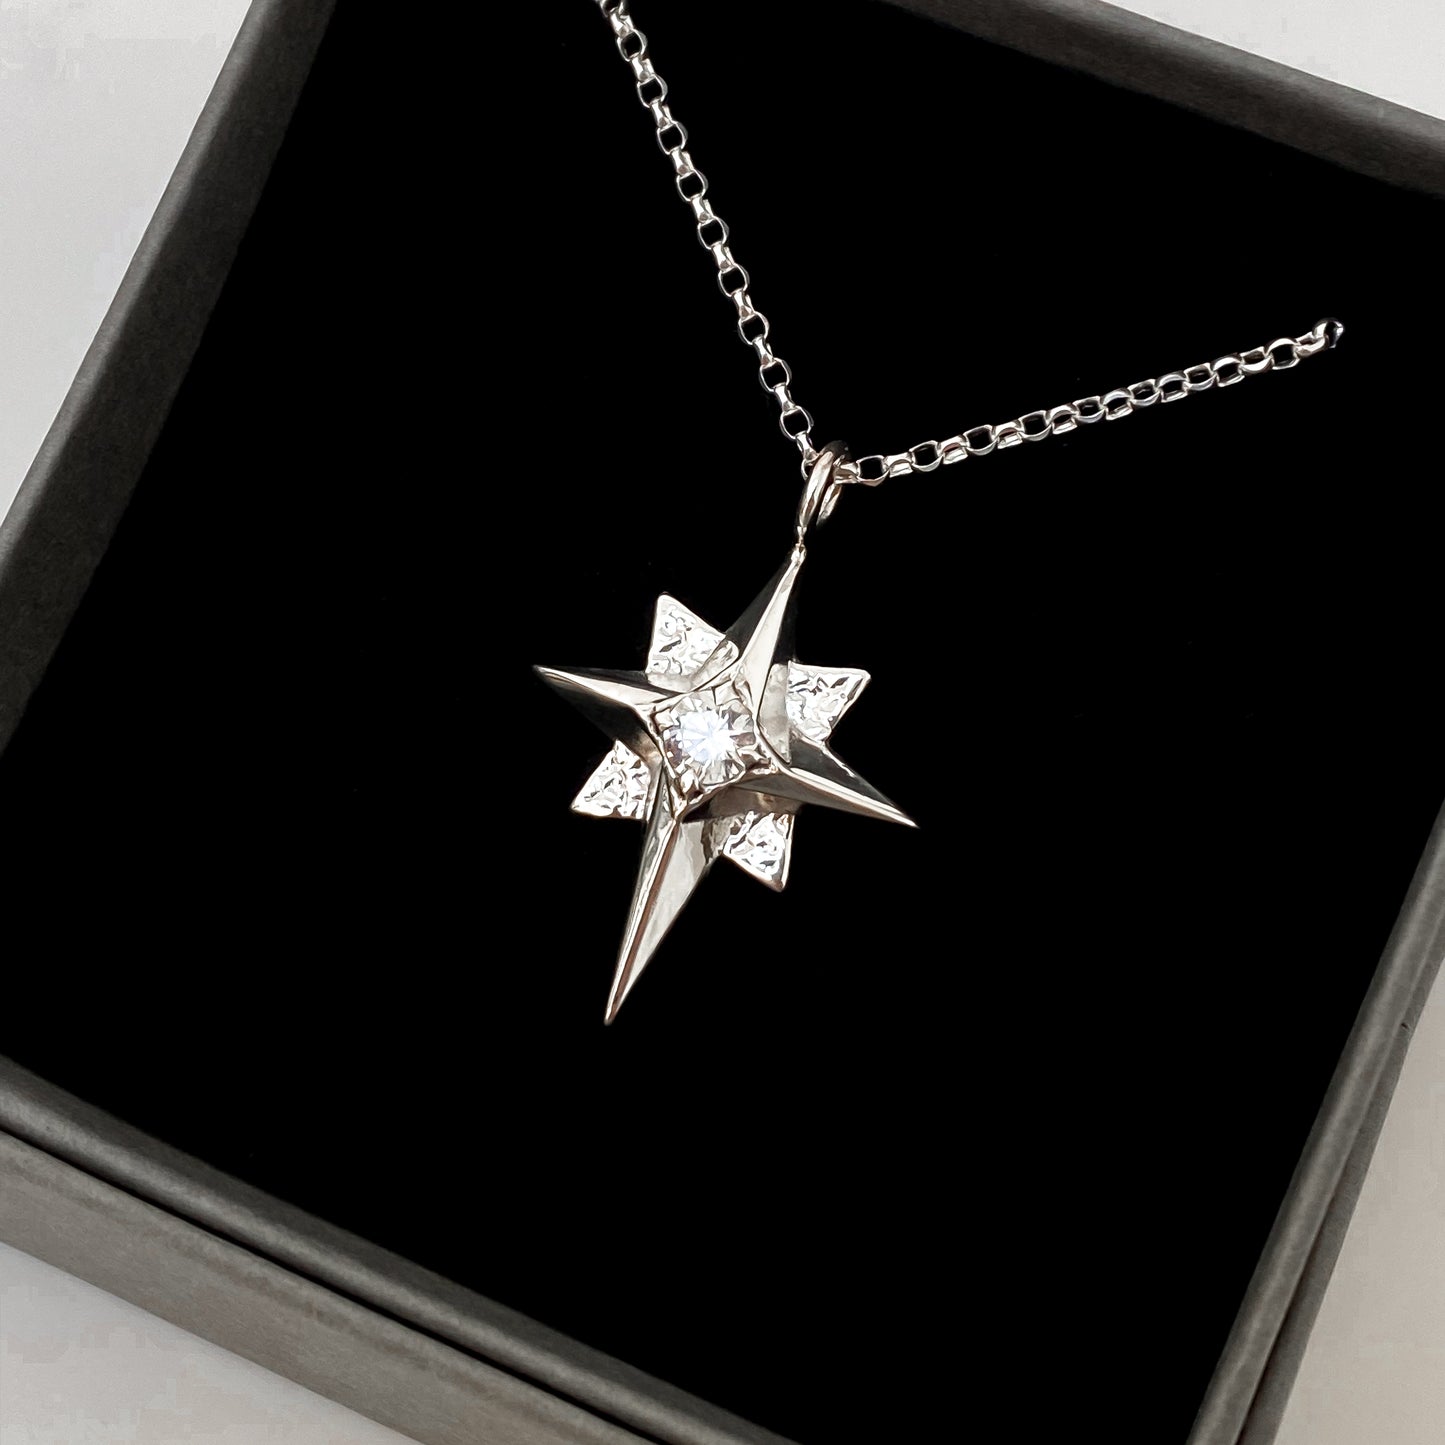 North Star Silver Pendant Necklace with White Topaz